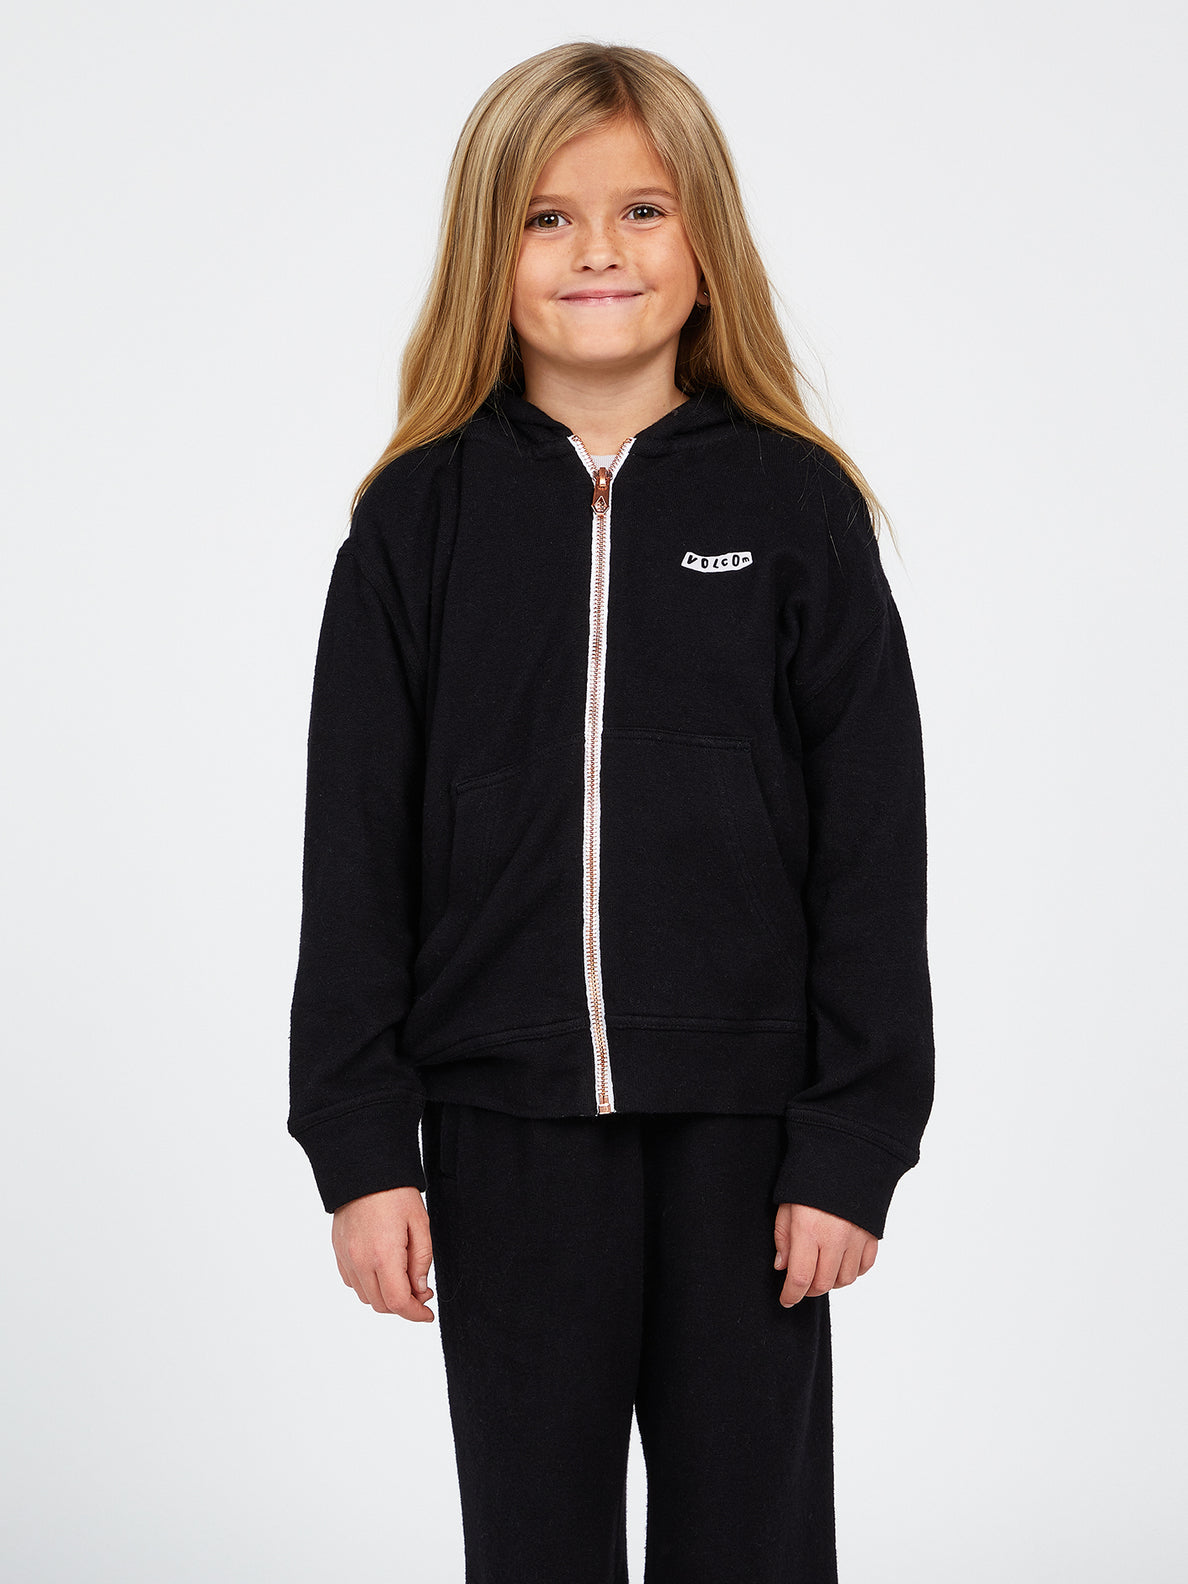 Girls Lived In Lounge Zip Up Hoodie - Black (R4812102_BLK) [F]